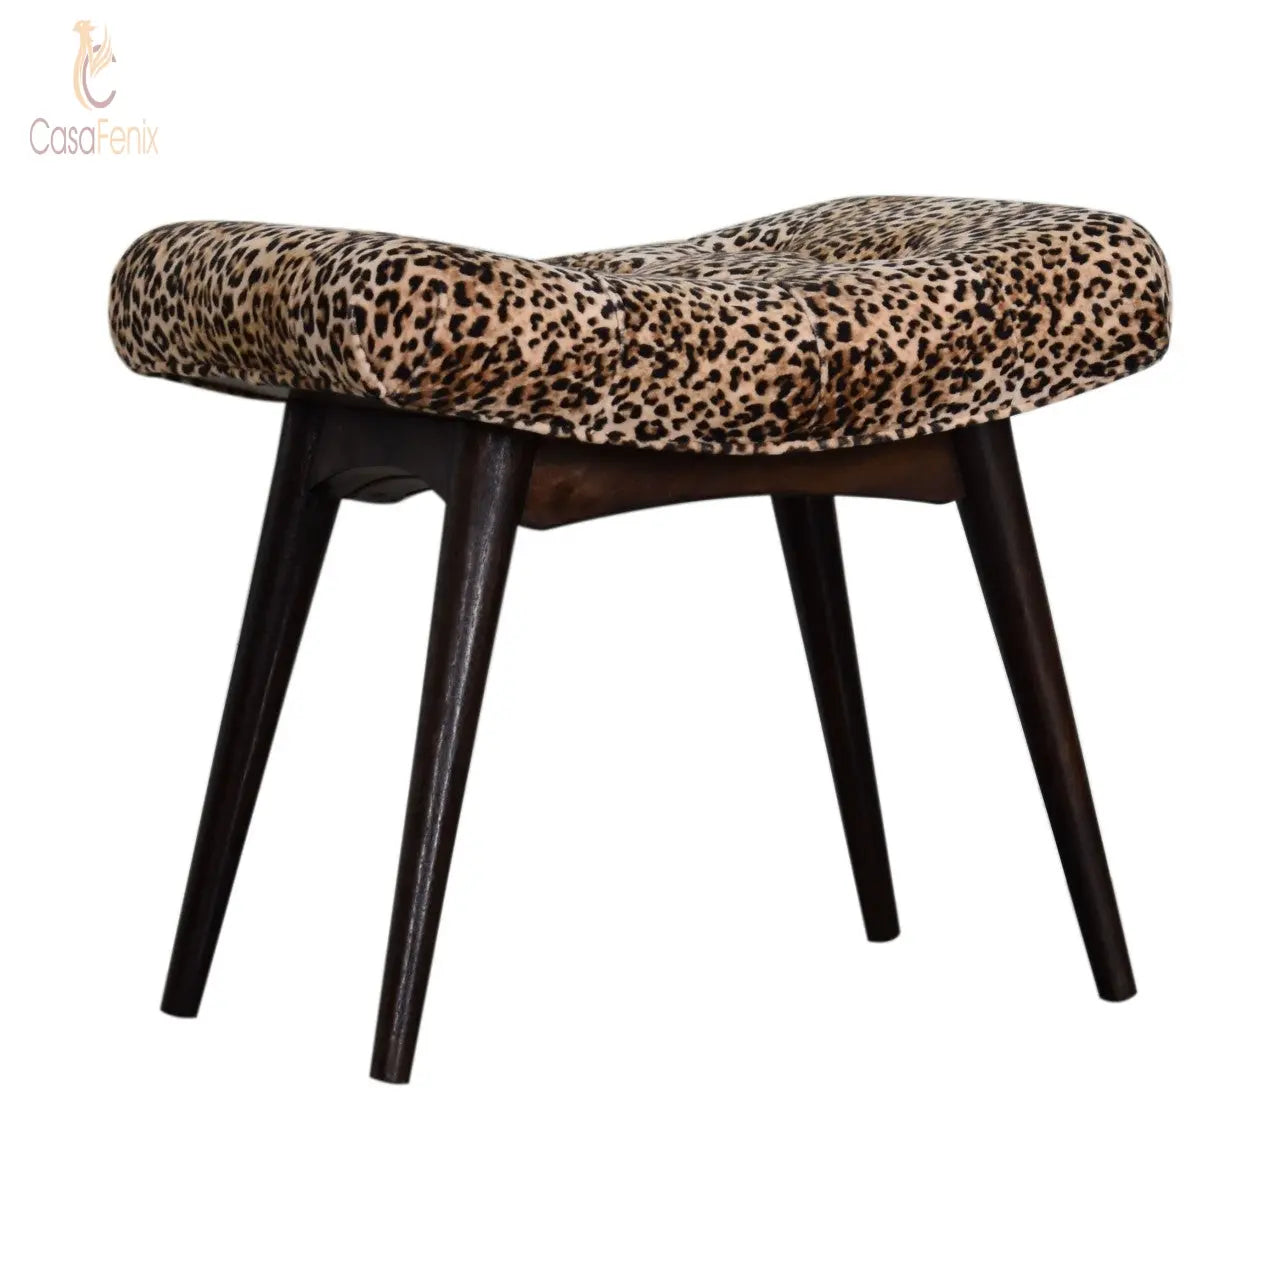 Leopard Print Curved Bench Nordic Style - CasaFenix